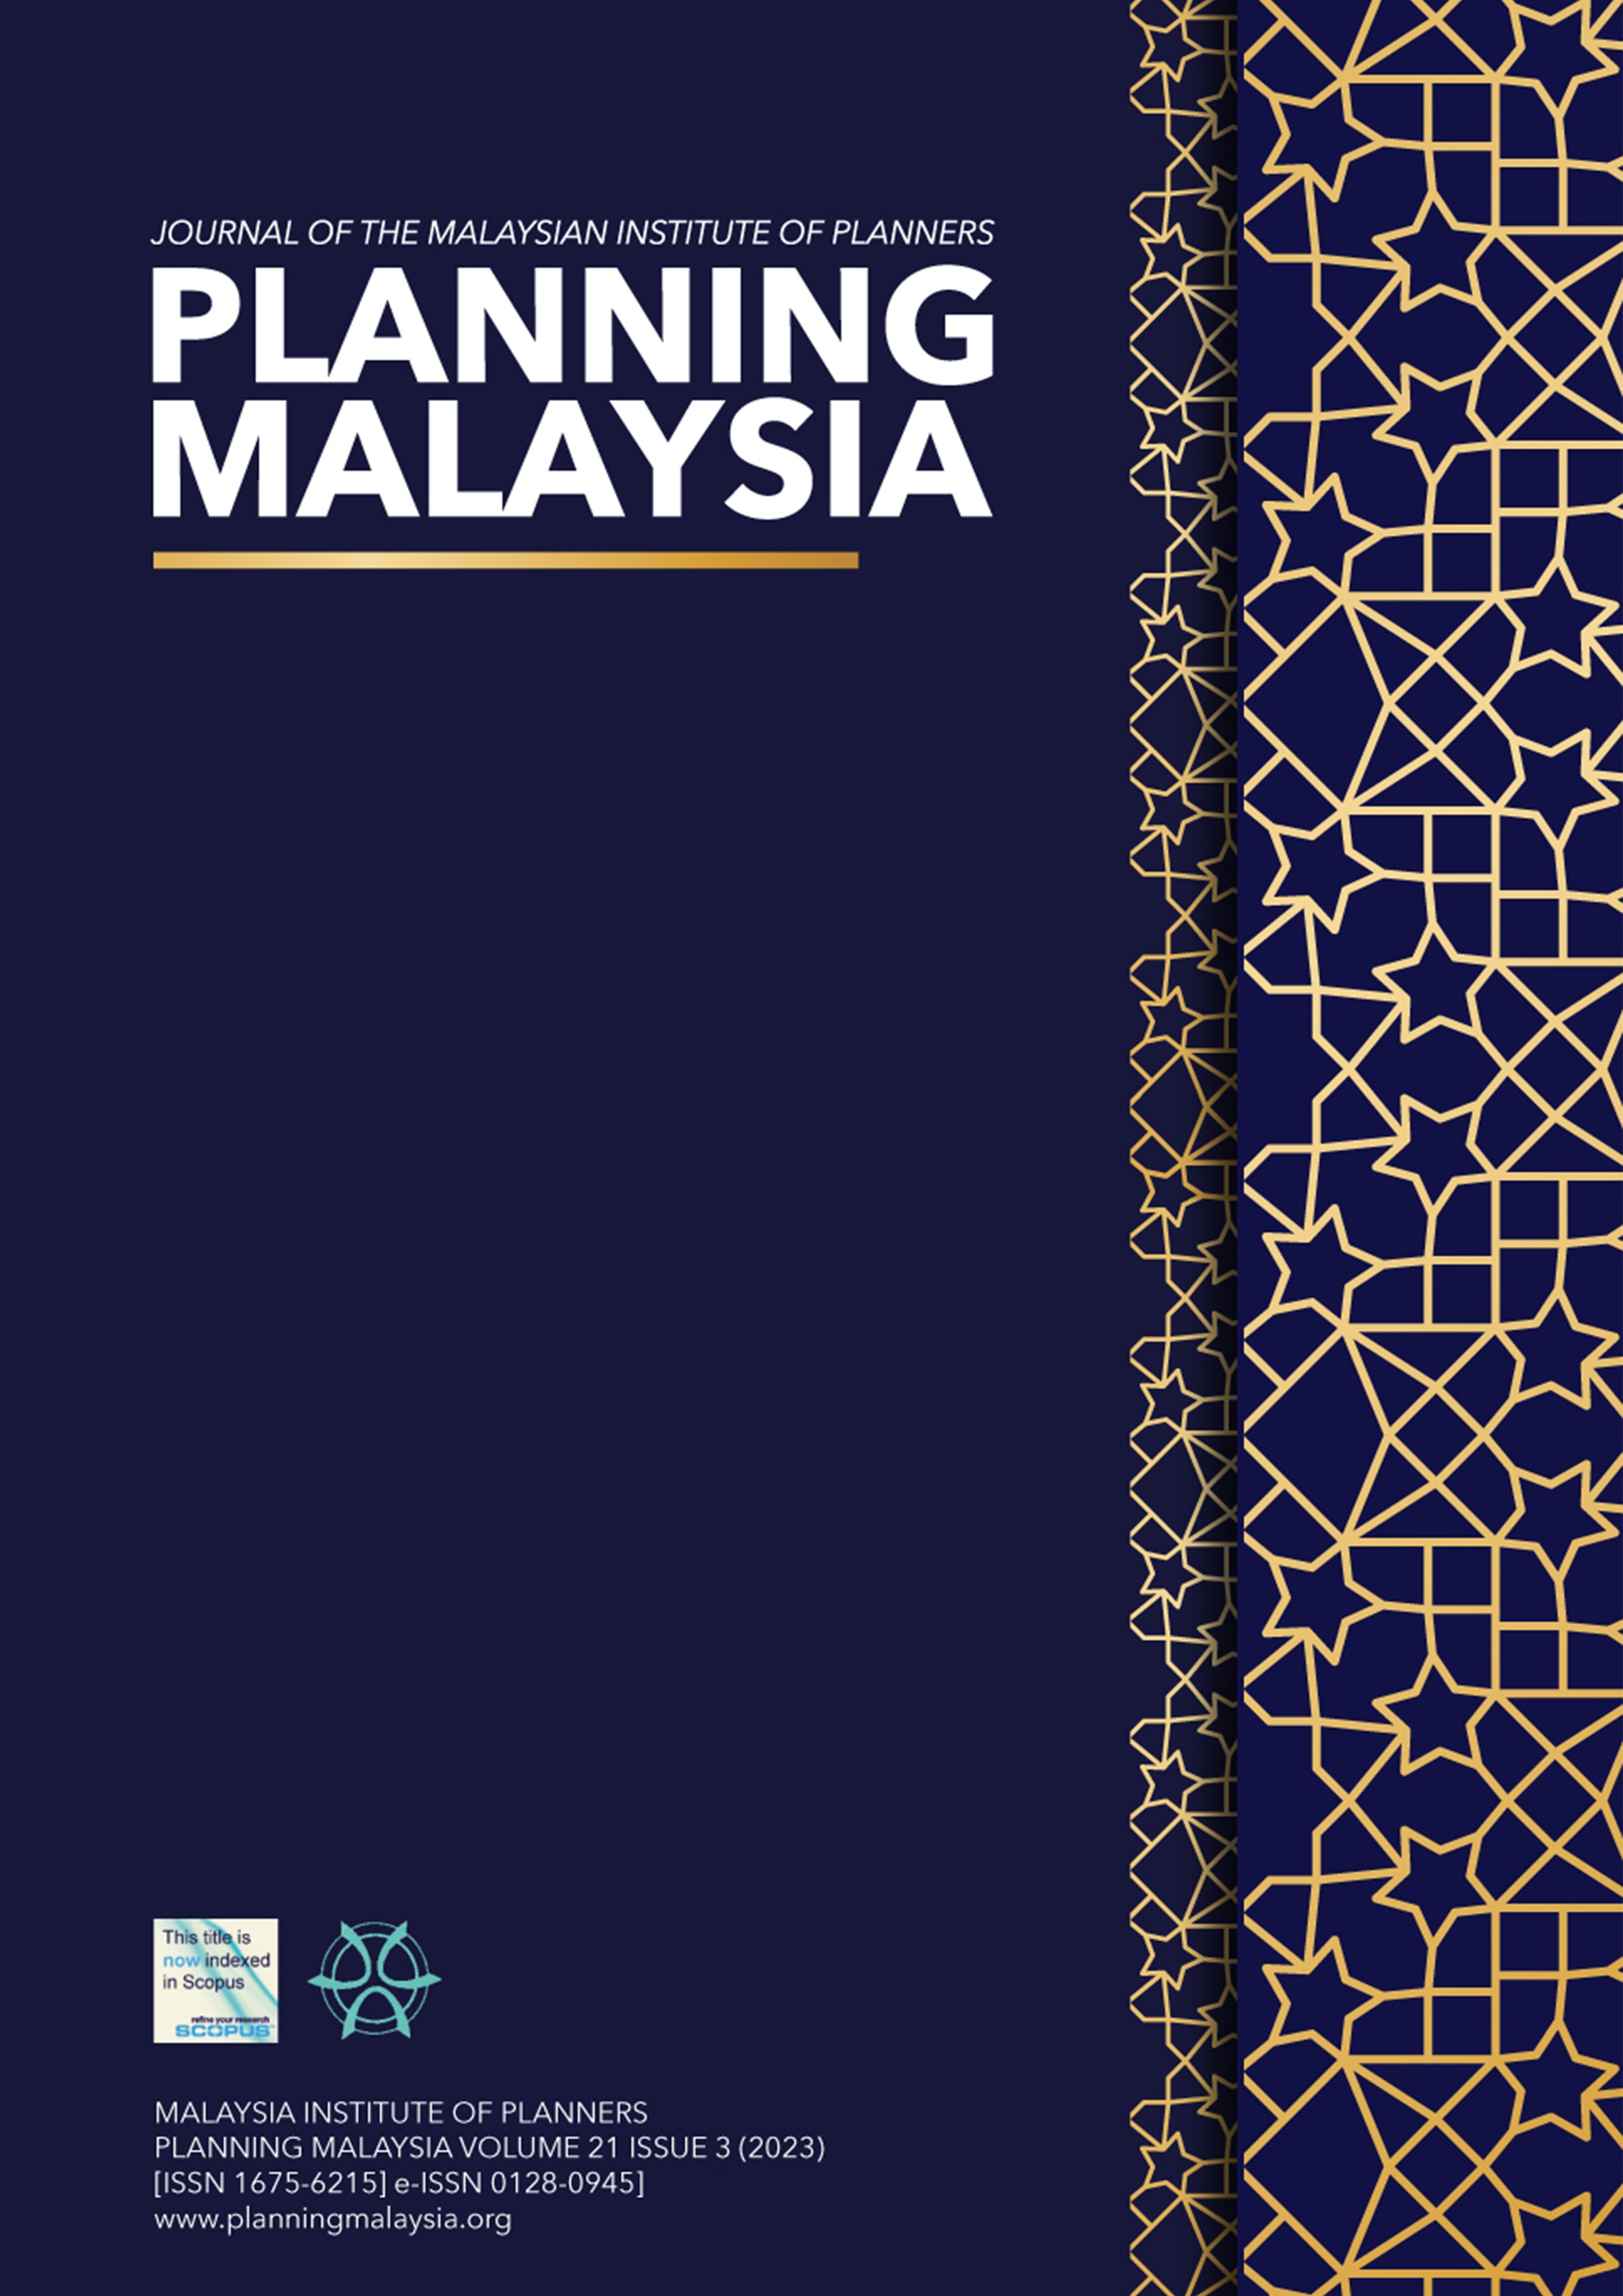 					View Vol. 21 (2023): PLANNING MALAYSIA JOURNAL : Volume 21, Issue 3, 2023
				